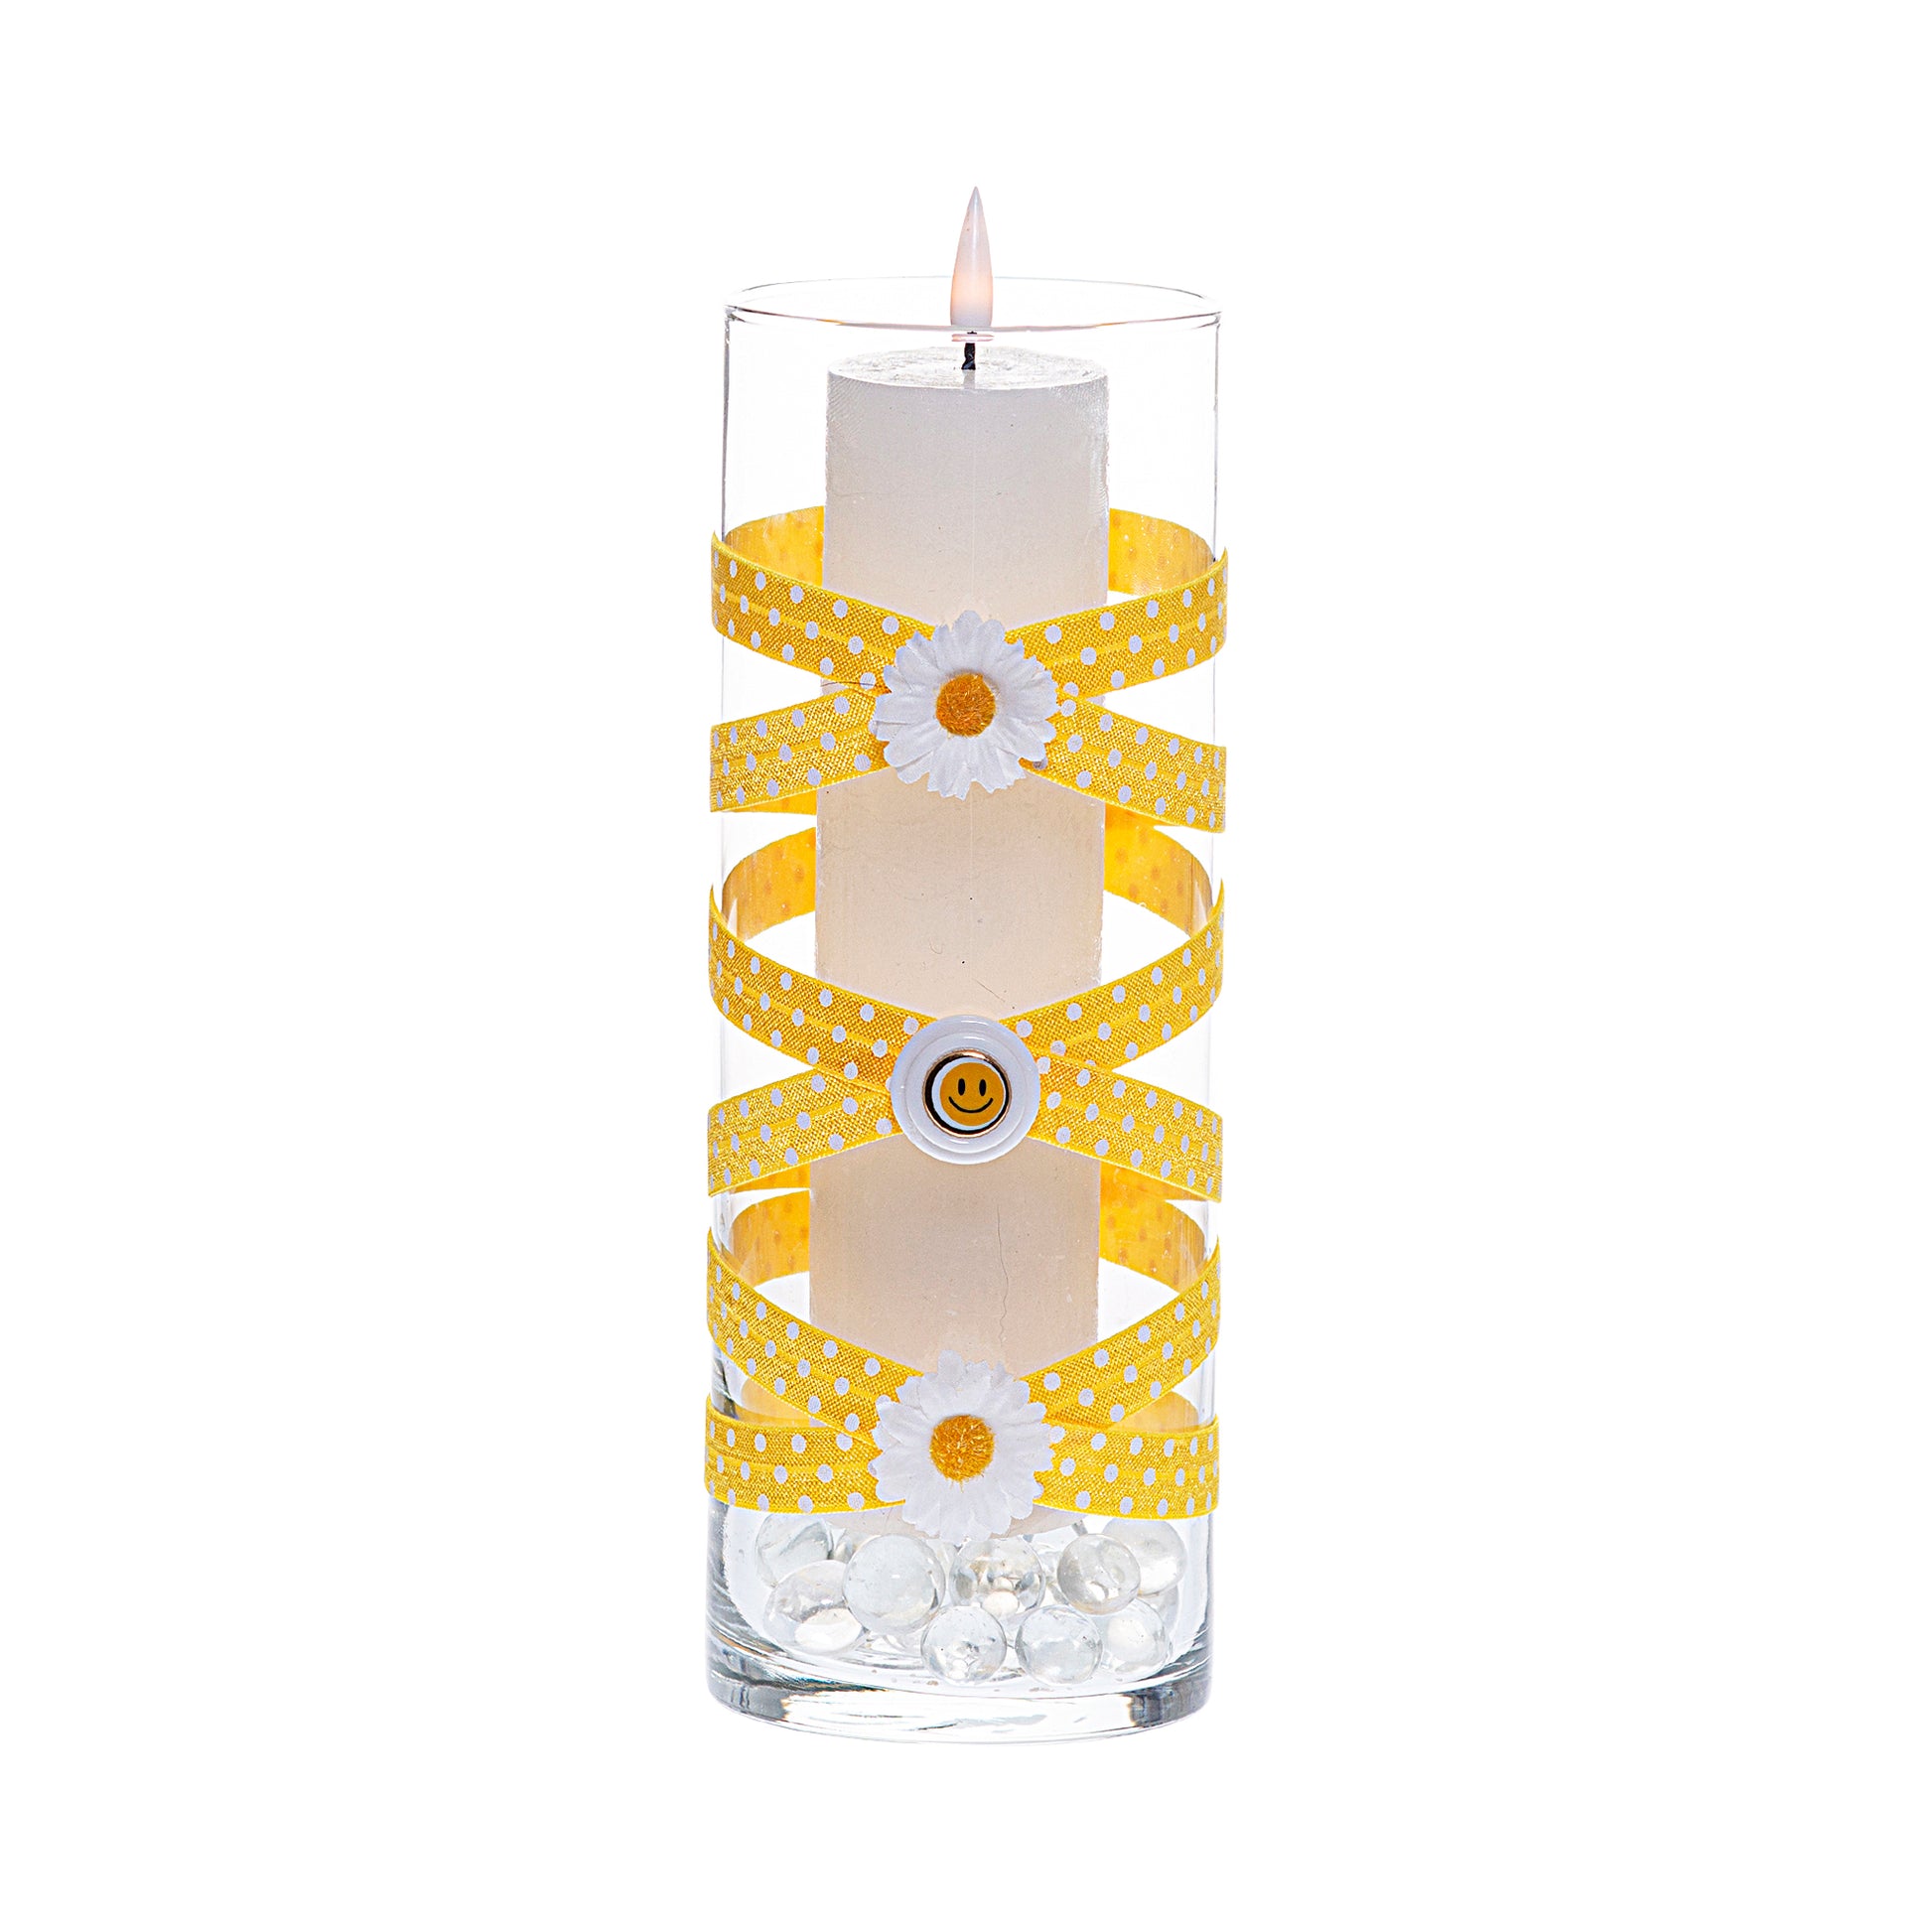 Front of Glass Wrappings' 10" bud vase wrapped in lemon yellow and polka dot elastic, decorated with 2 white daisies and a gold smiley face.